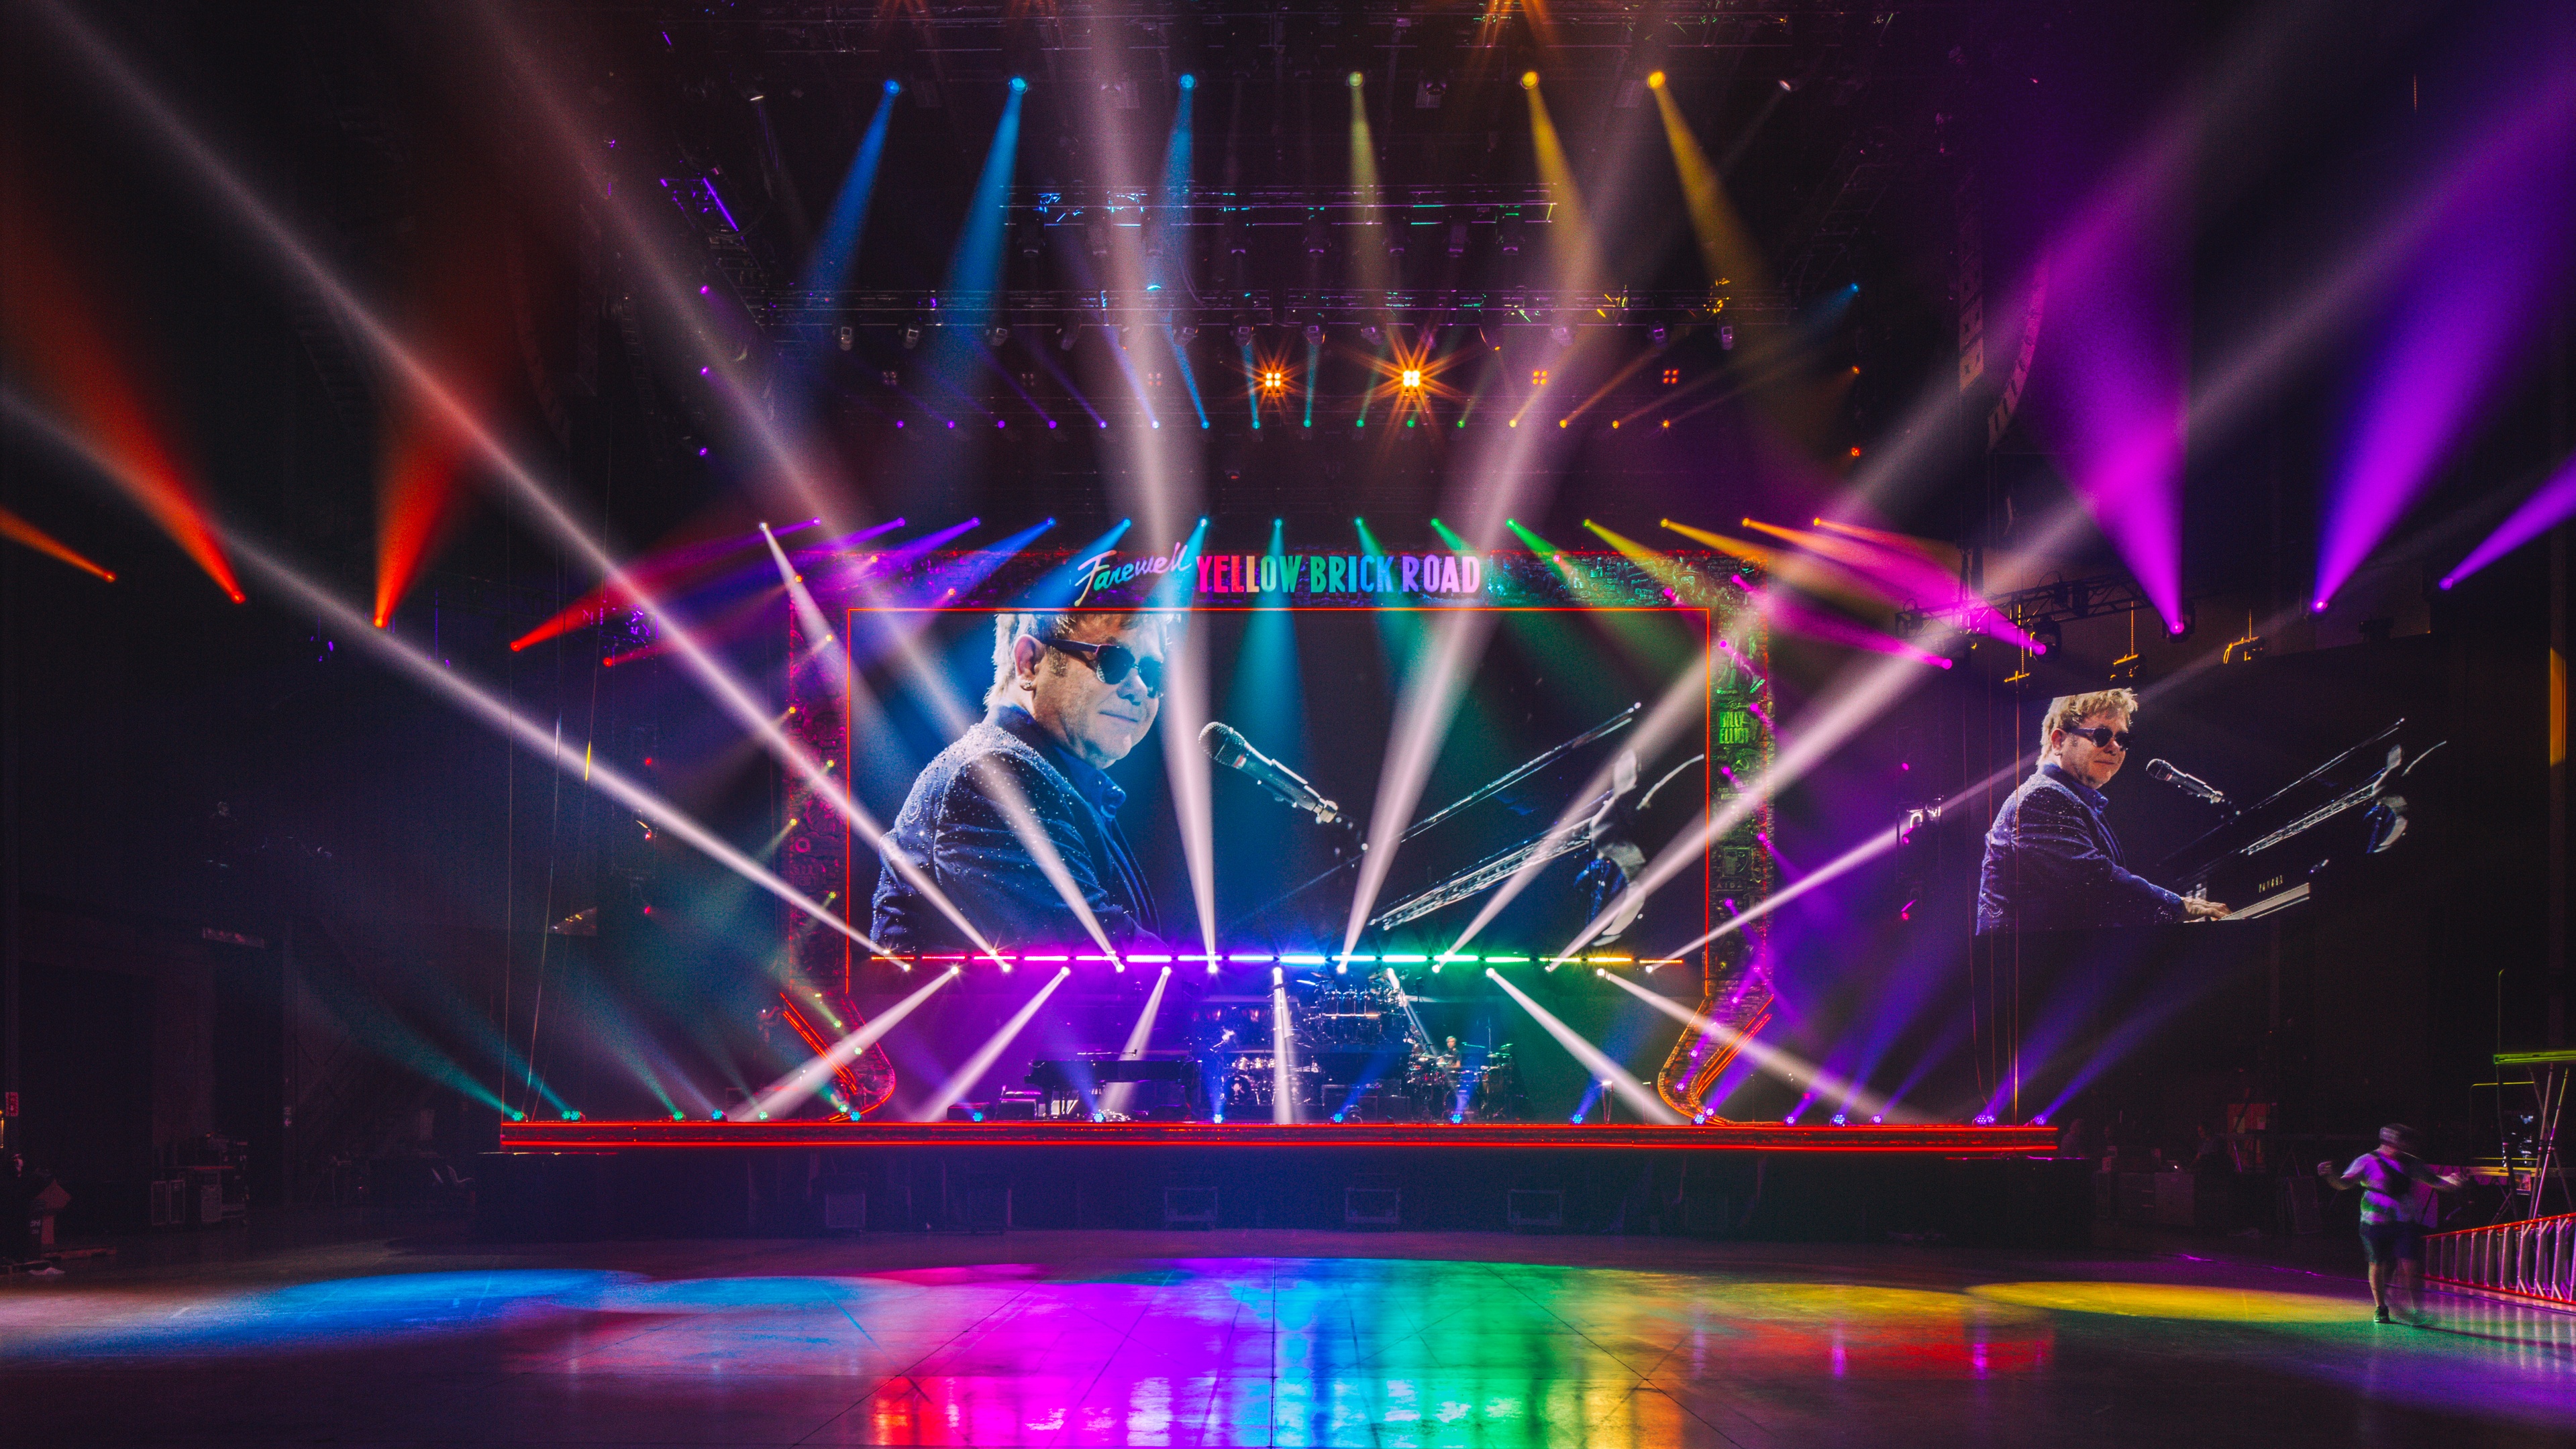 Elton John on stage performing on piano with rainbow colored lights